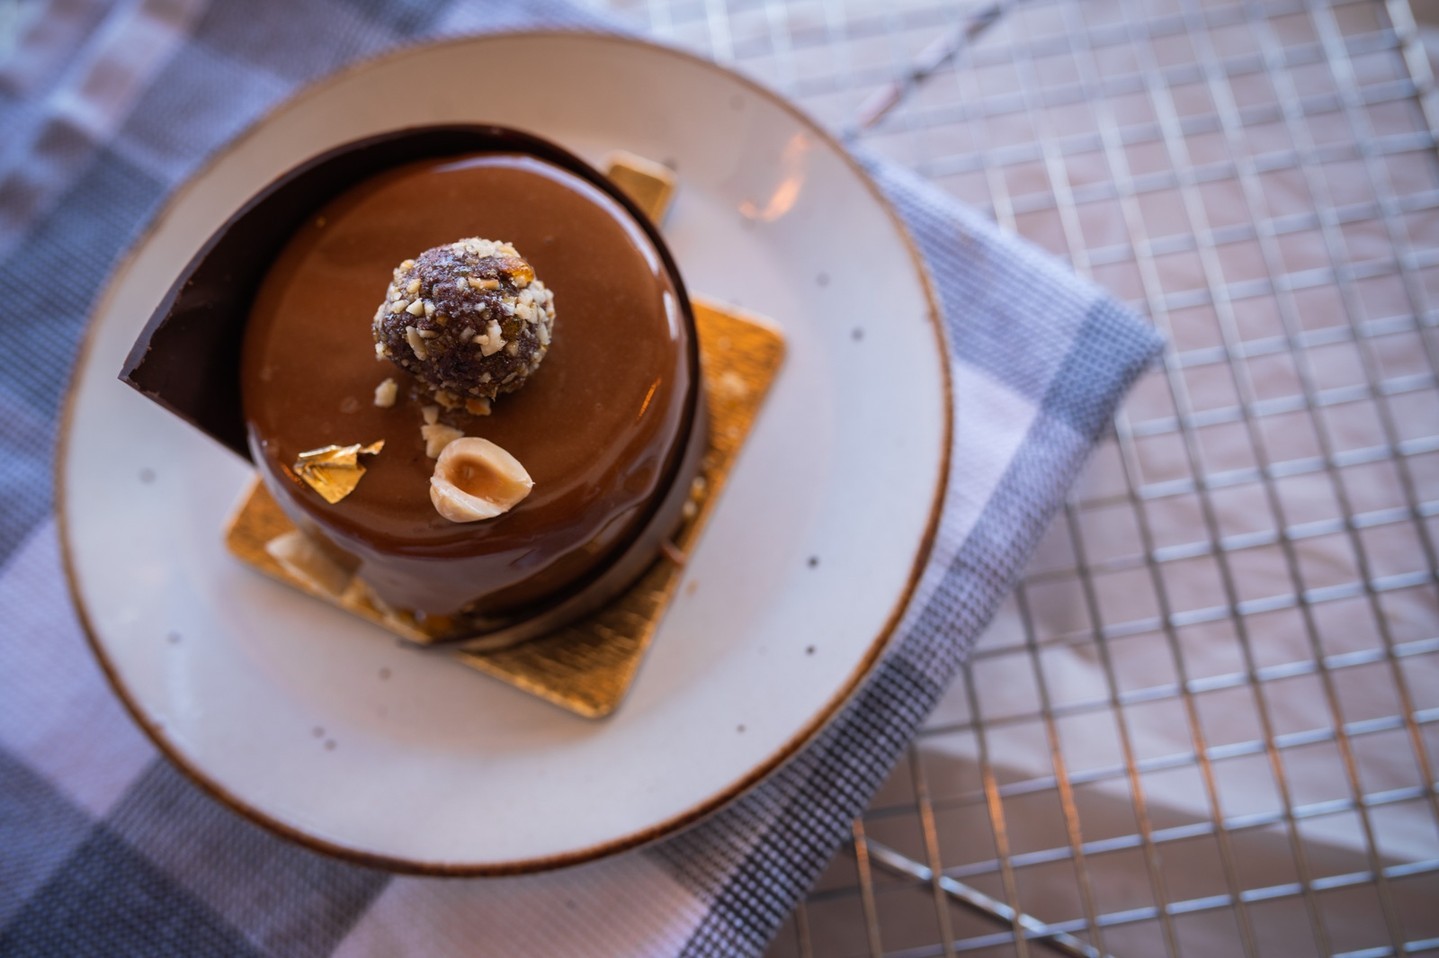 Have you tried our 10-layered Hazelnut Petit Gâteau? Hazelnut, dark chocolate and salted caramel perfectly woven together and only available until May 28!